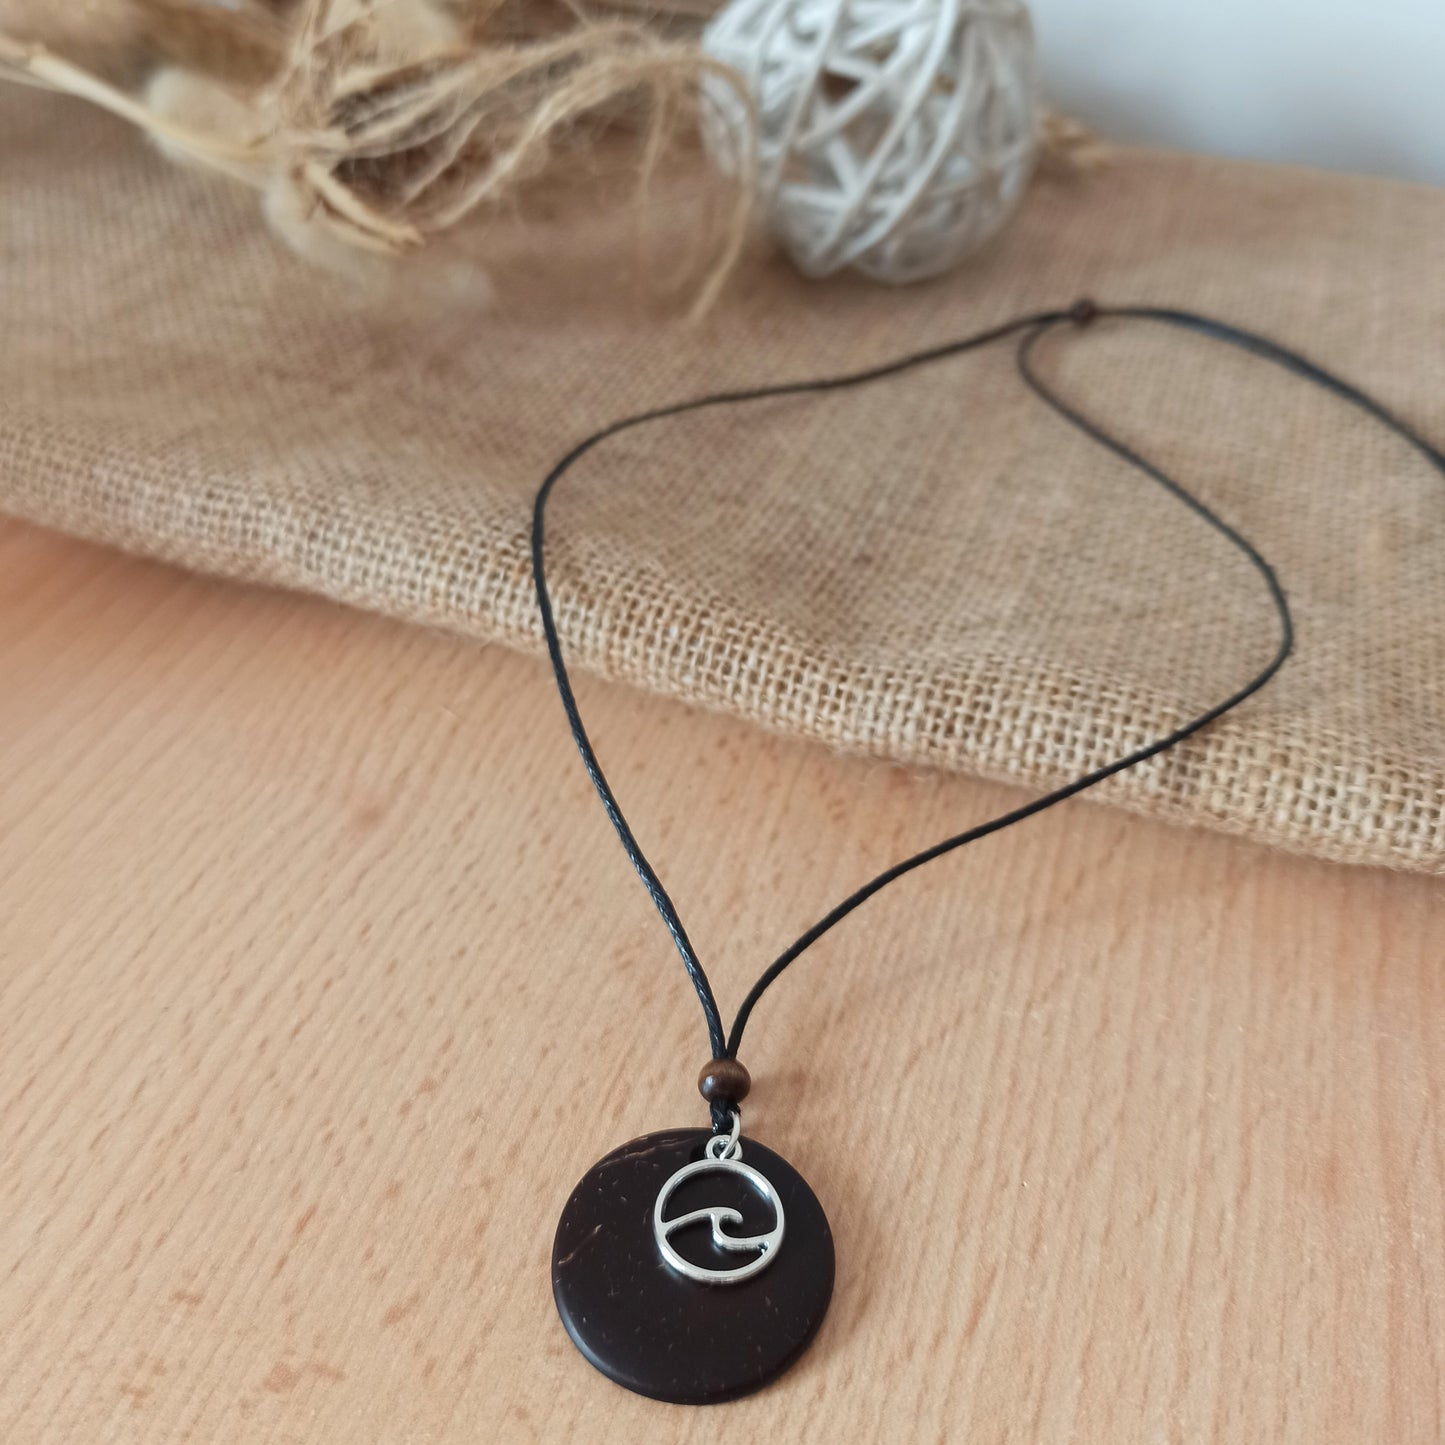 Coconut Shell Silver Wave Charm Necklace